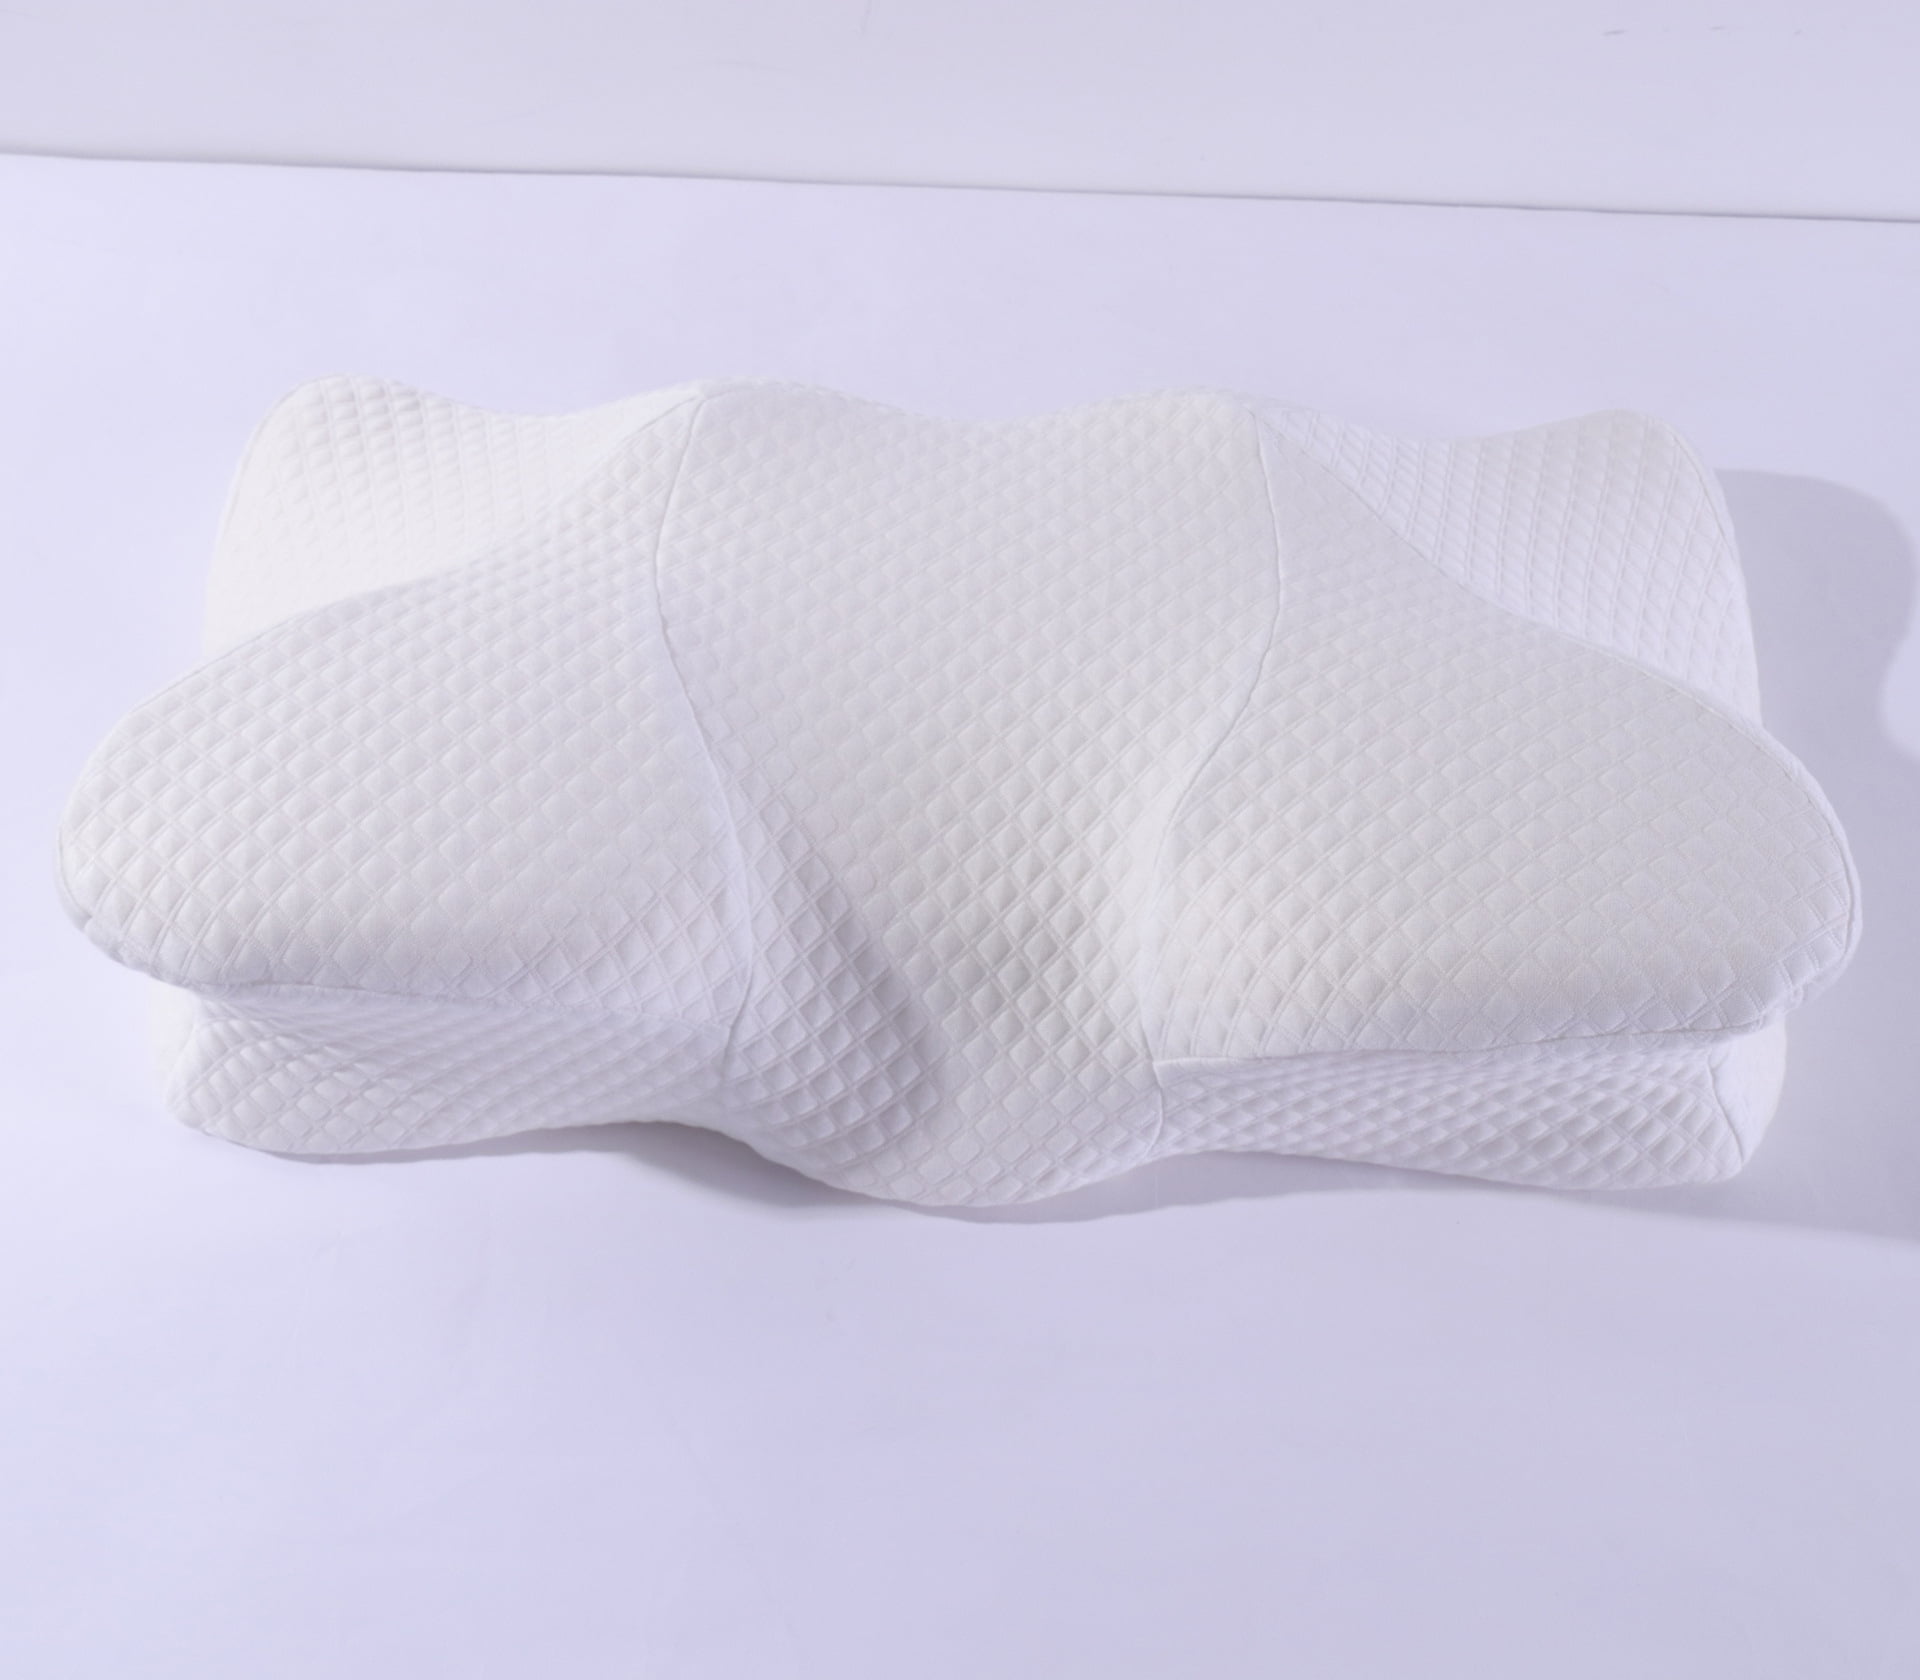 Details about   Memory Foam Sleep Pillow Contour Cervical Orthopedic Neck Support Breath Pillows 